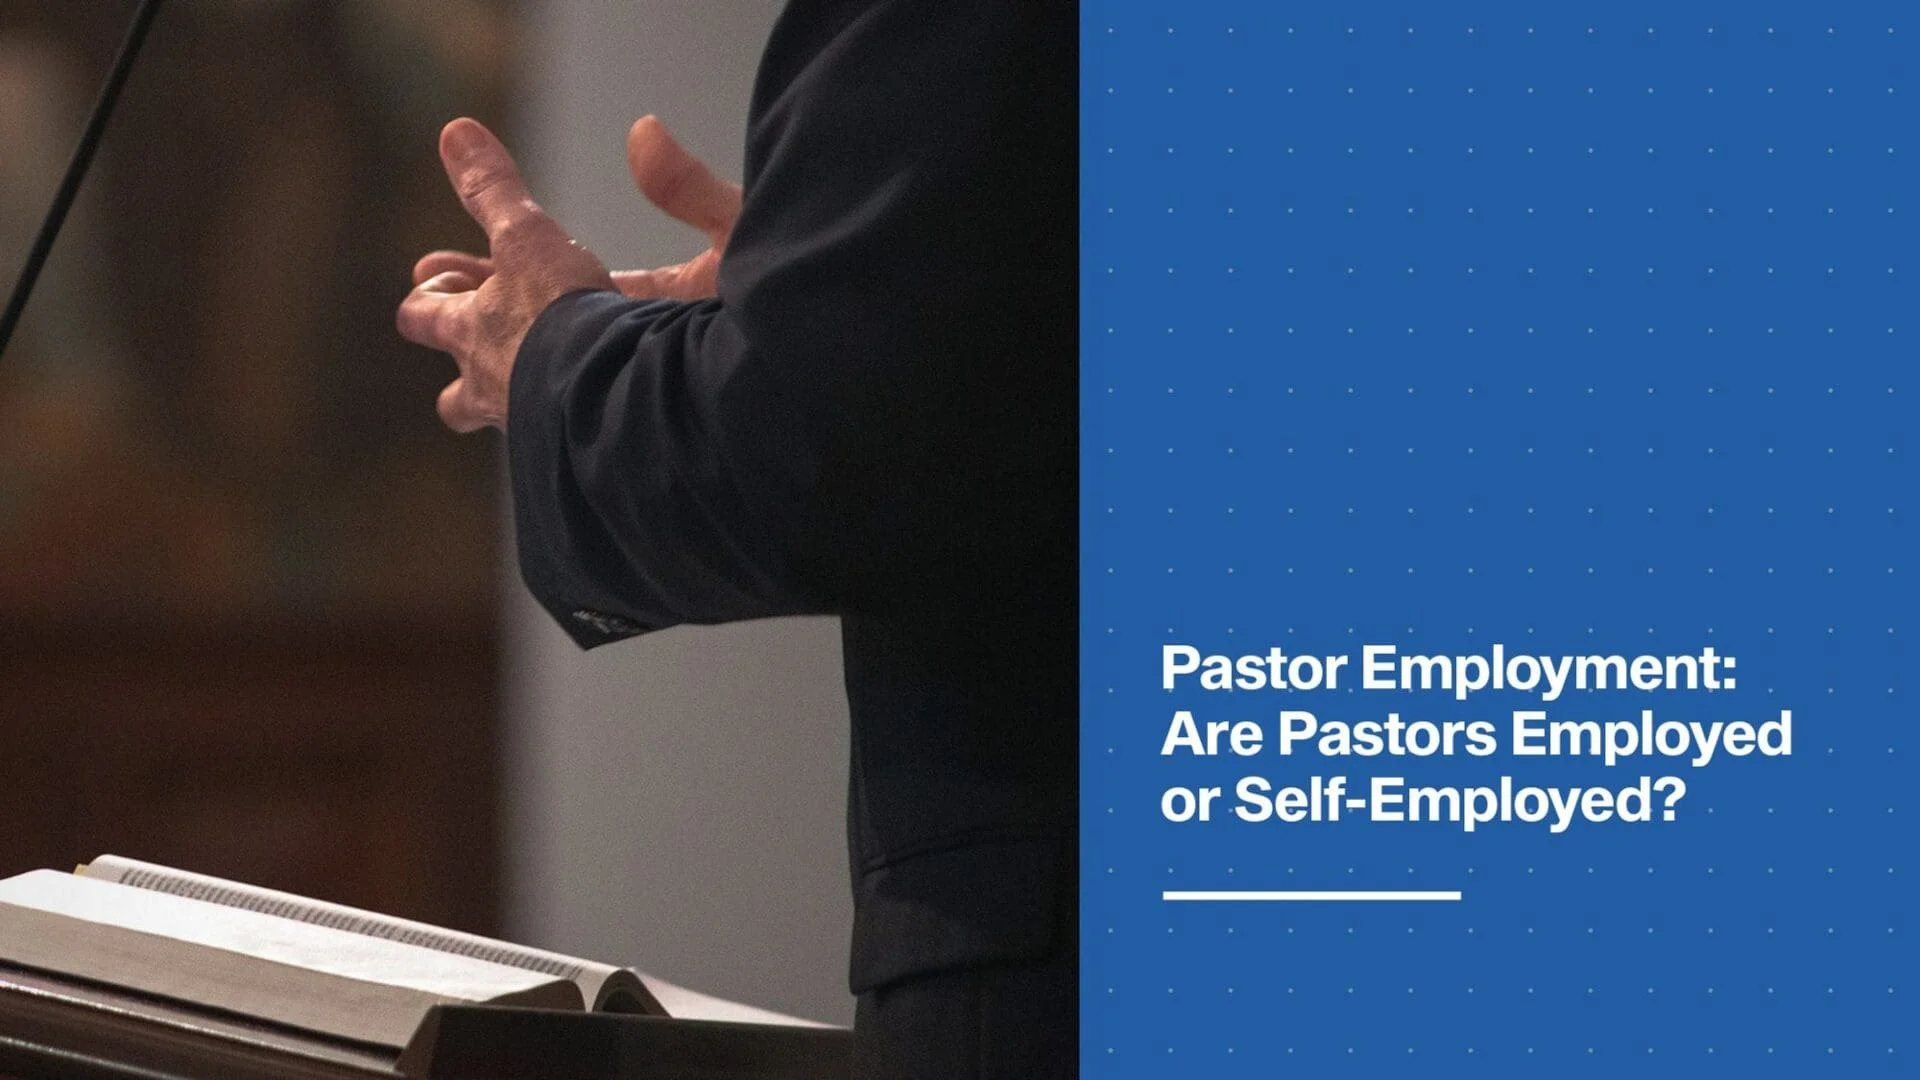 Pastor Employment: Are Pastors Employed or Self-Employed?